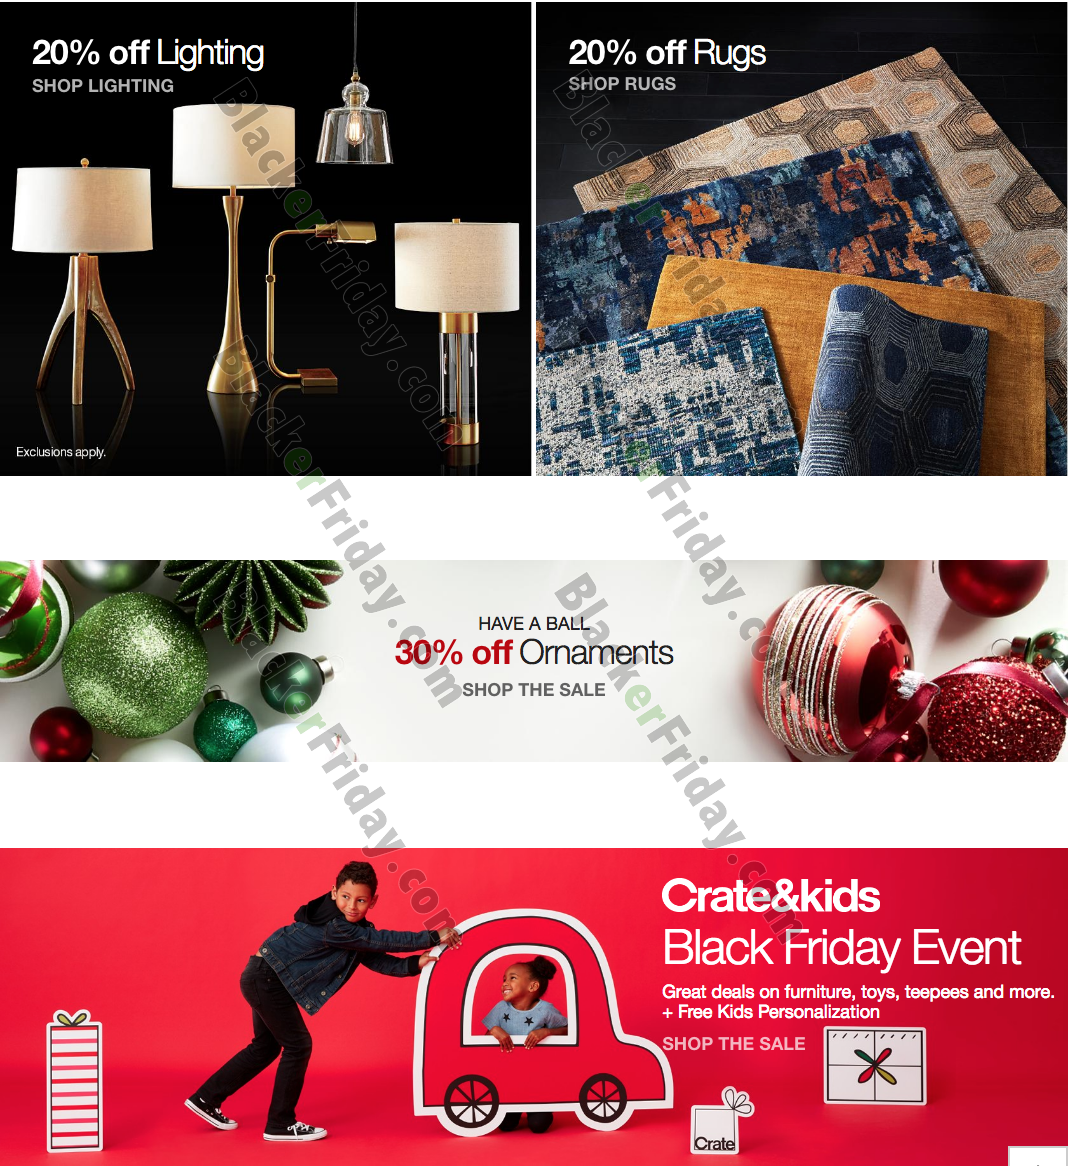 Crate & Barrel Black Friday 2021 Sale - What to Expect - Blacker Friday - Does Primark Have Black Friday Deals